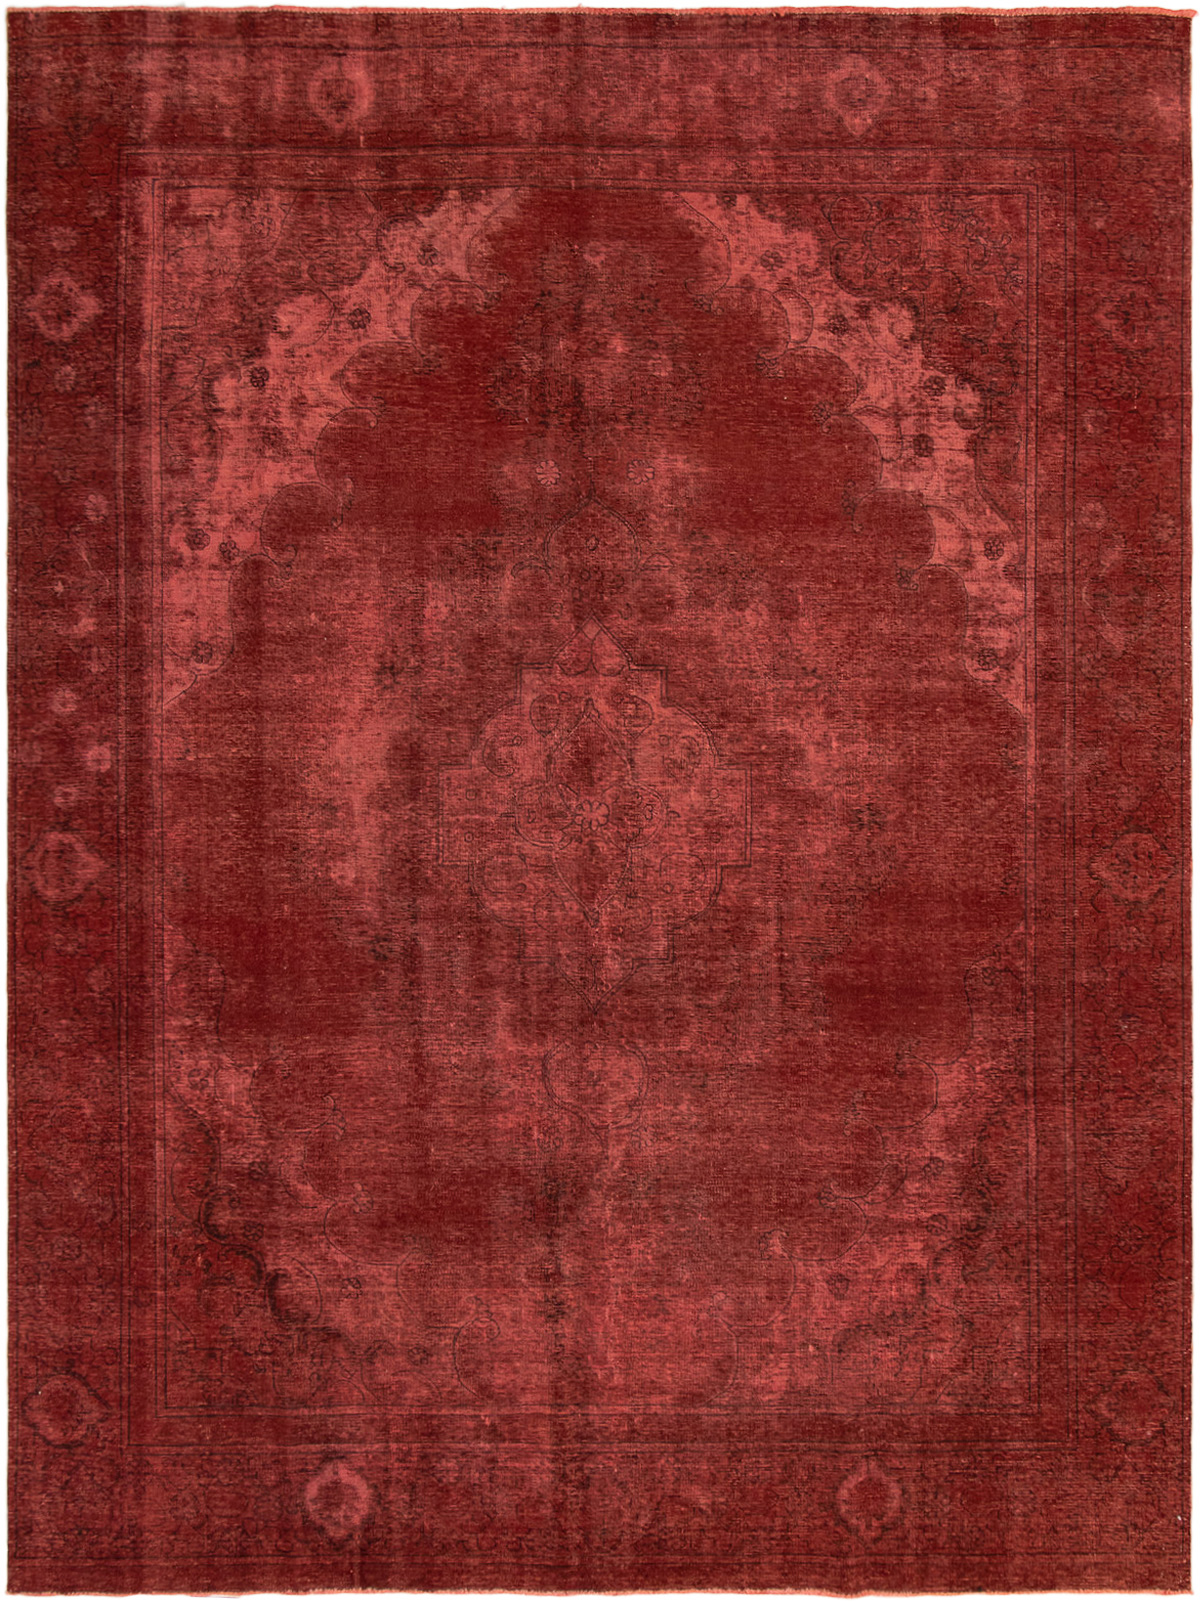 Hand-knotted Color Transition Dark Red Wool Rug 9'0" x 12'0" Size: 9'0" x 12'0"  